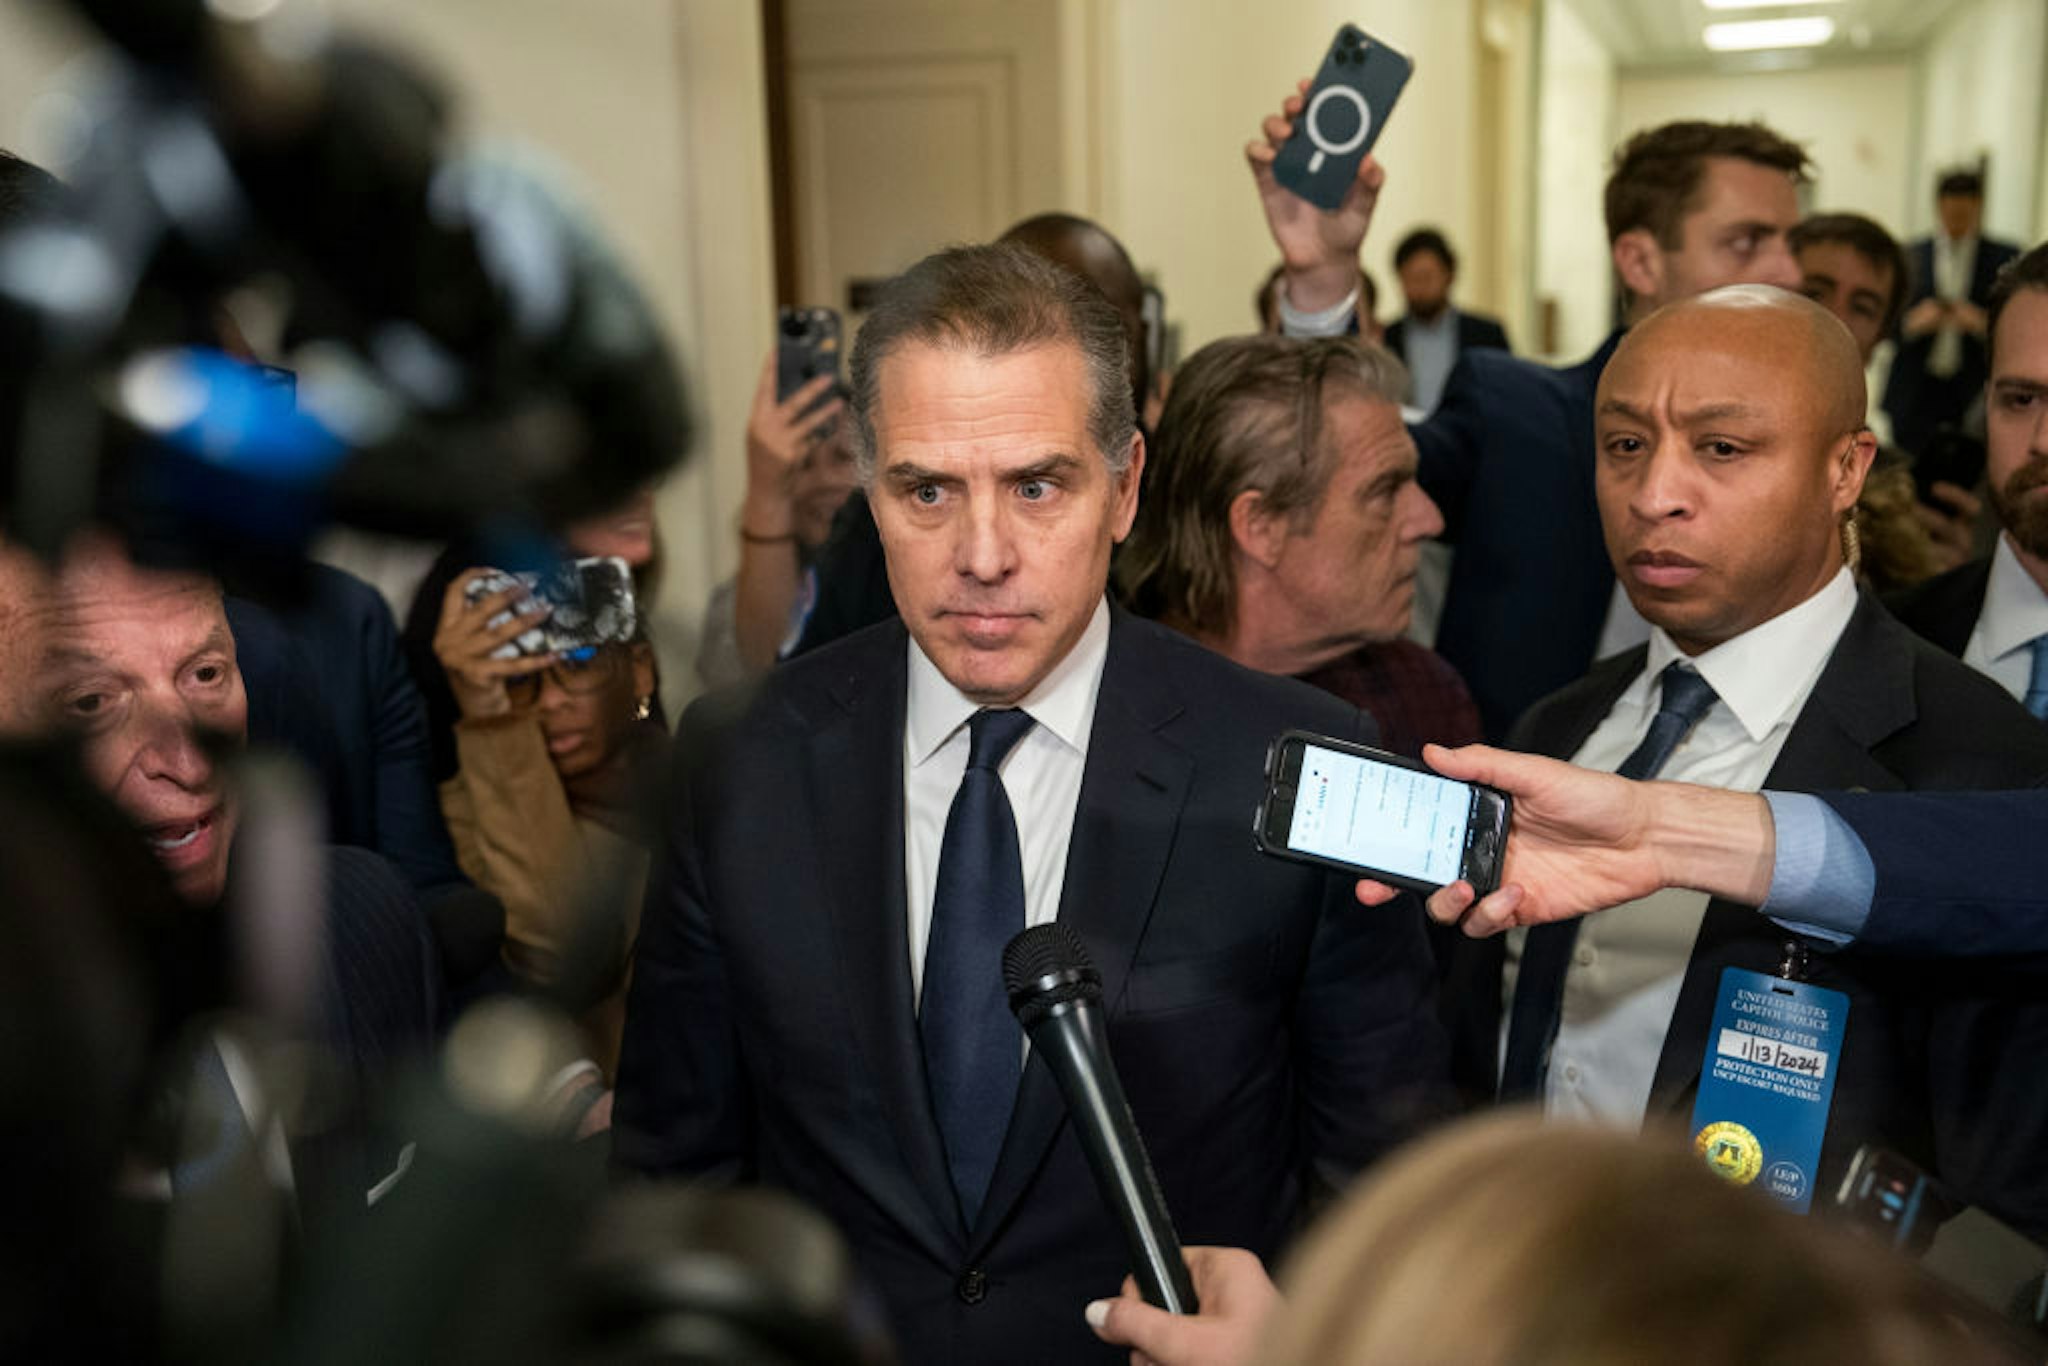 WASHINGTON, DC - JANUARY 10: Hunter Biden, son of U.S. President Joe Biden, departs a House Oversight Committee meeting at Capitol Hill on January 10, 2024 in Washington, DC. The committee is meeting today as it considers citing him for Contempt of Congress. (Photo by Kent Nishimura/Getty Images)